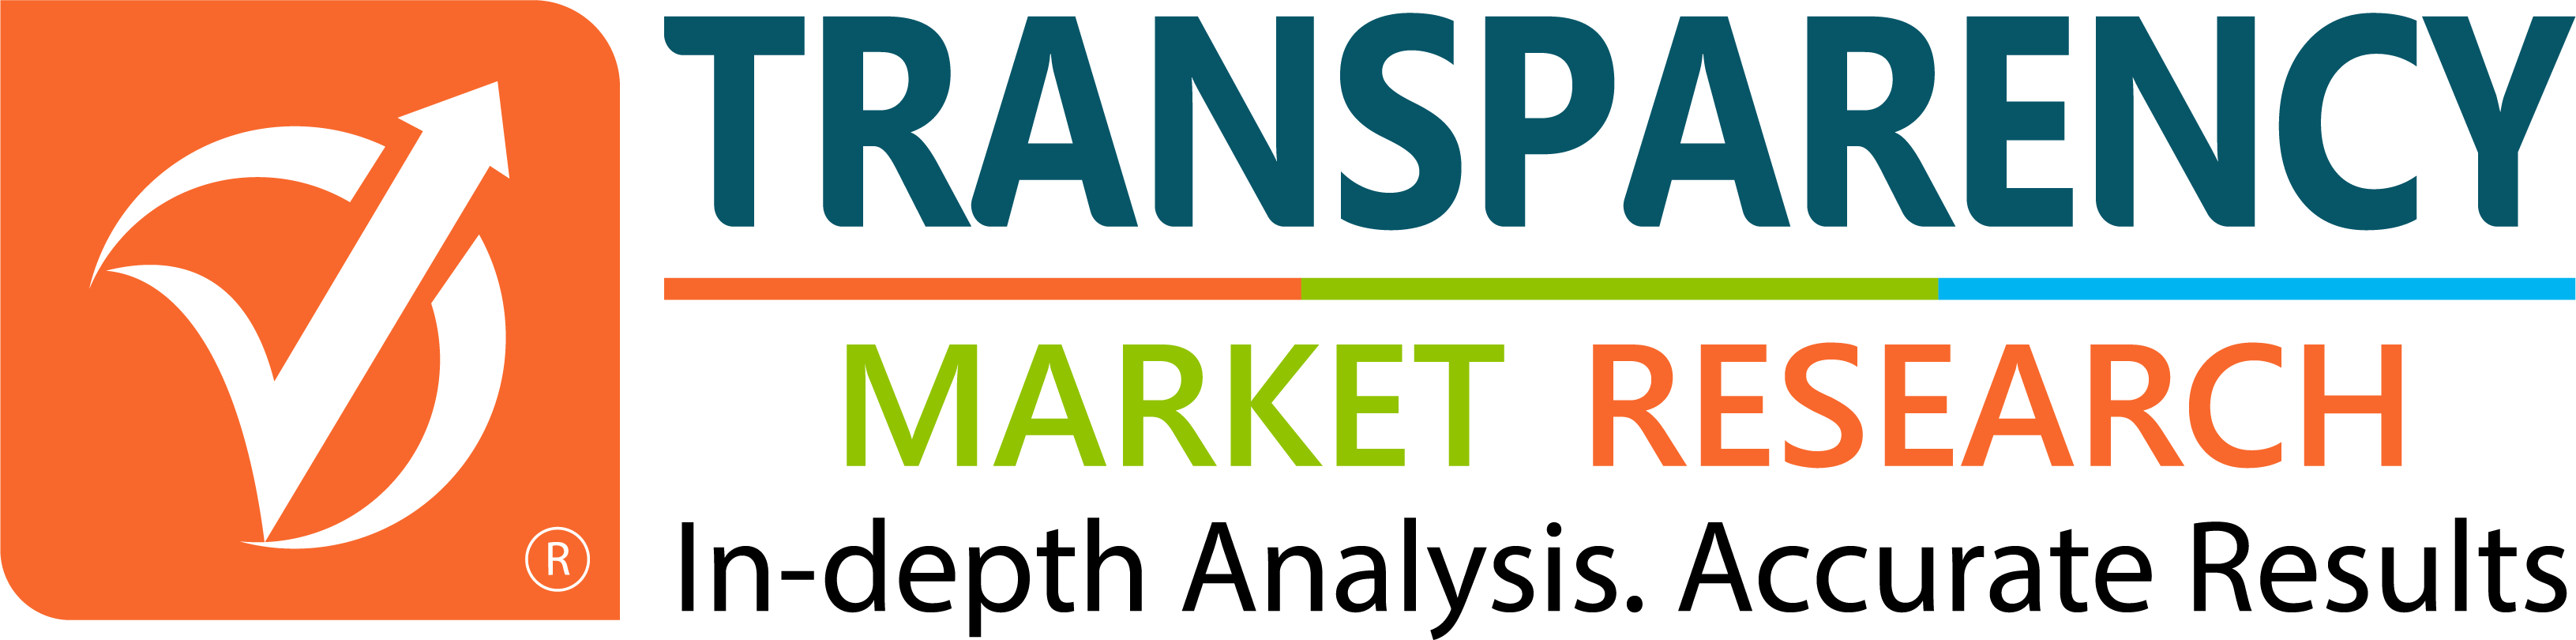 Aptamer Market to Expand at a Healthy CAGR of 21.0% from 2017 to 2025